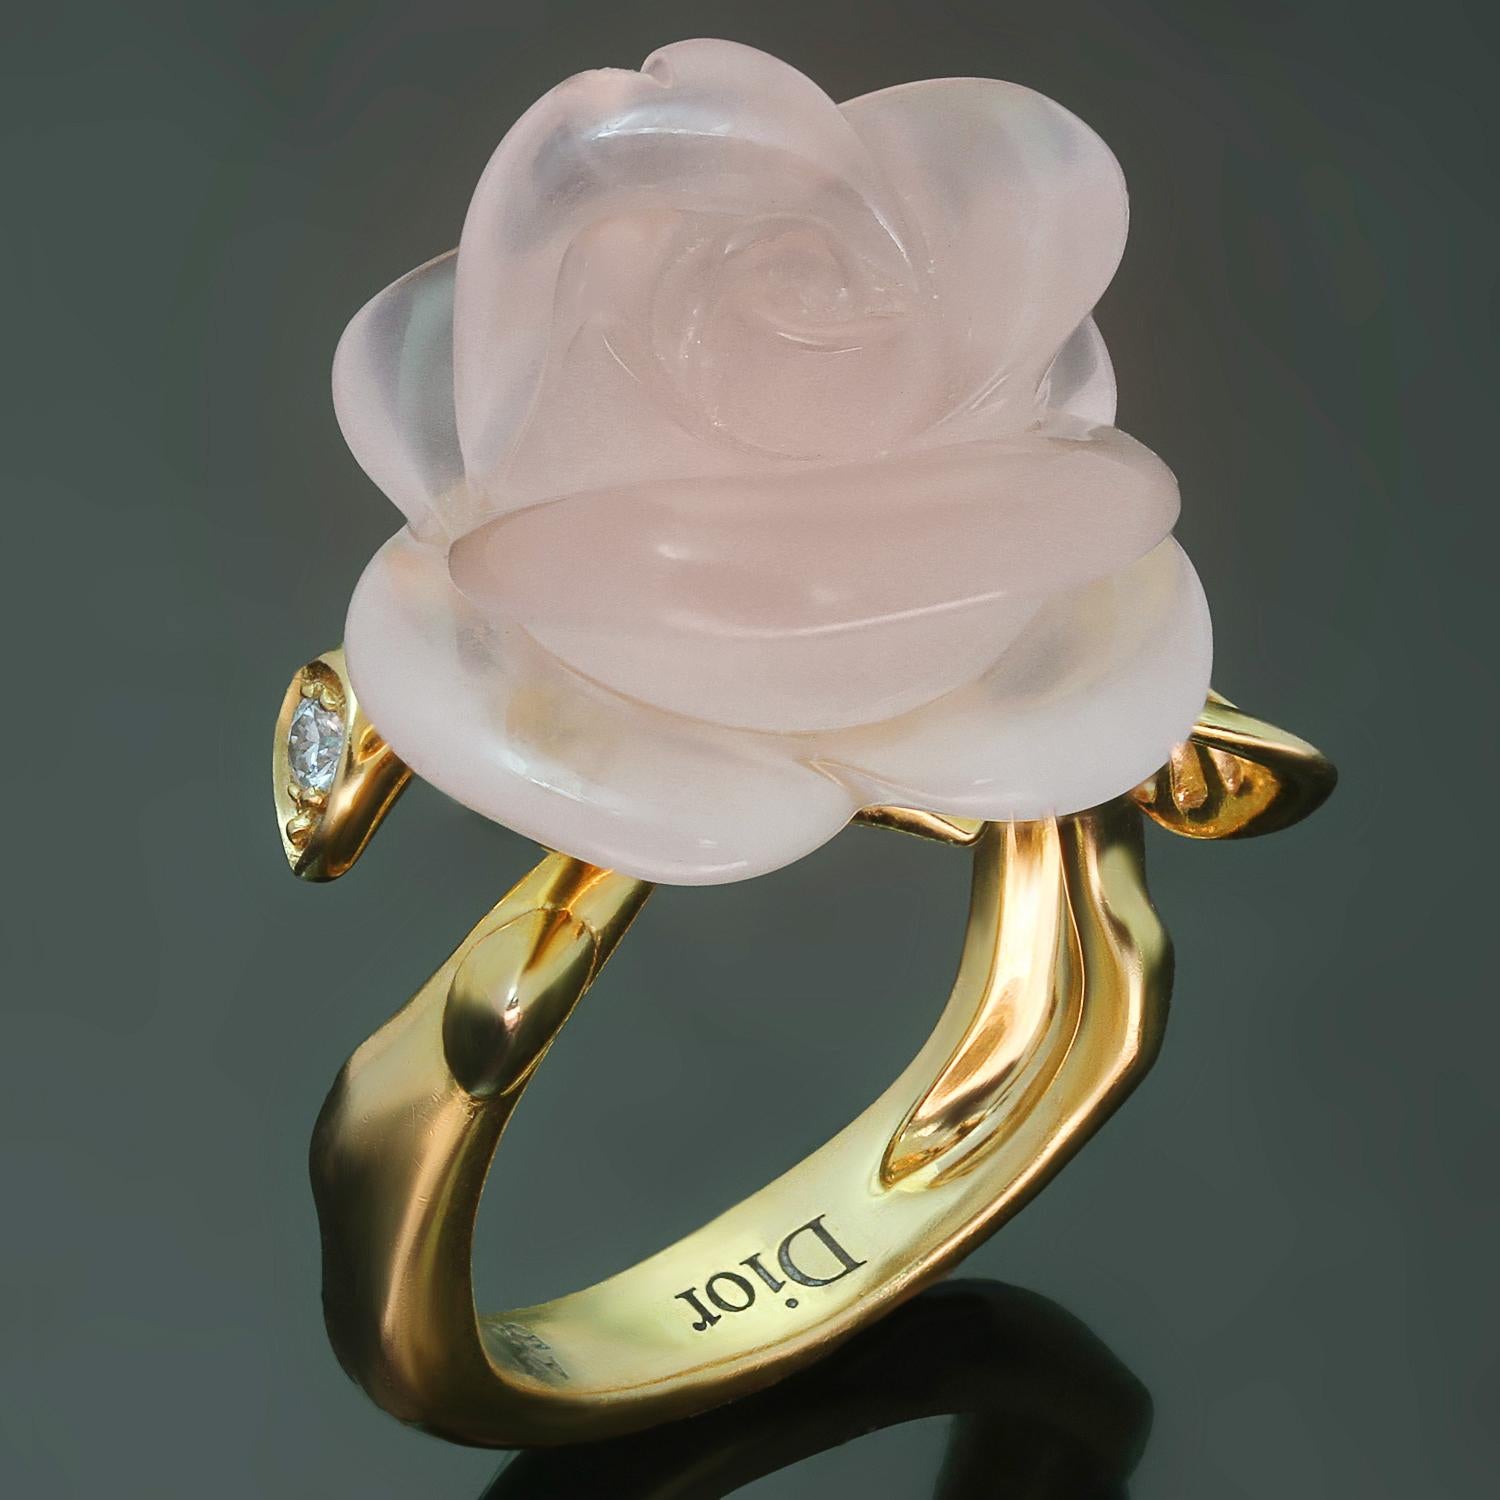 This gorgeous ring from Christian Dior's iconic Pre Catelan collection is crafted in 18k yellow gold and features an elegant rose flower made of pink quartz and accented with round brilliant E-F-G VVS1-VVS2 diamonds weighing an estimated 0.03